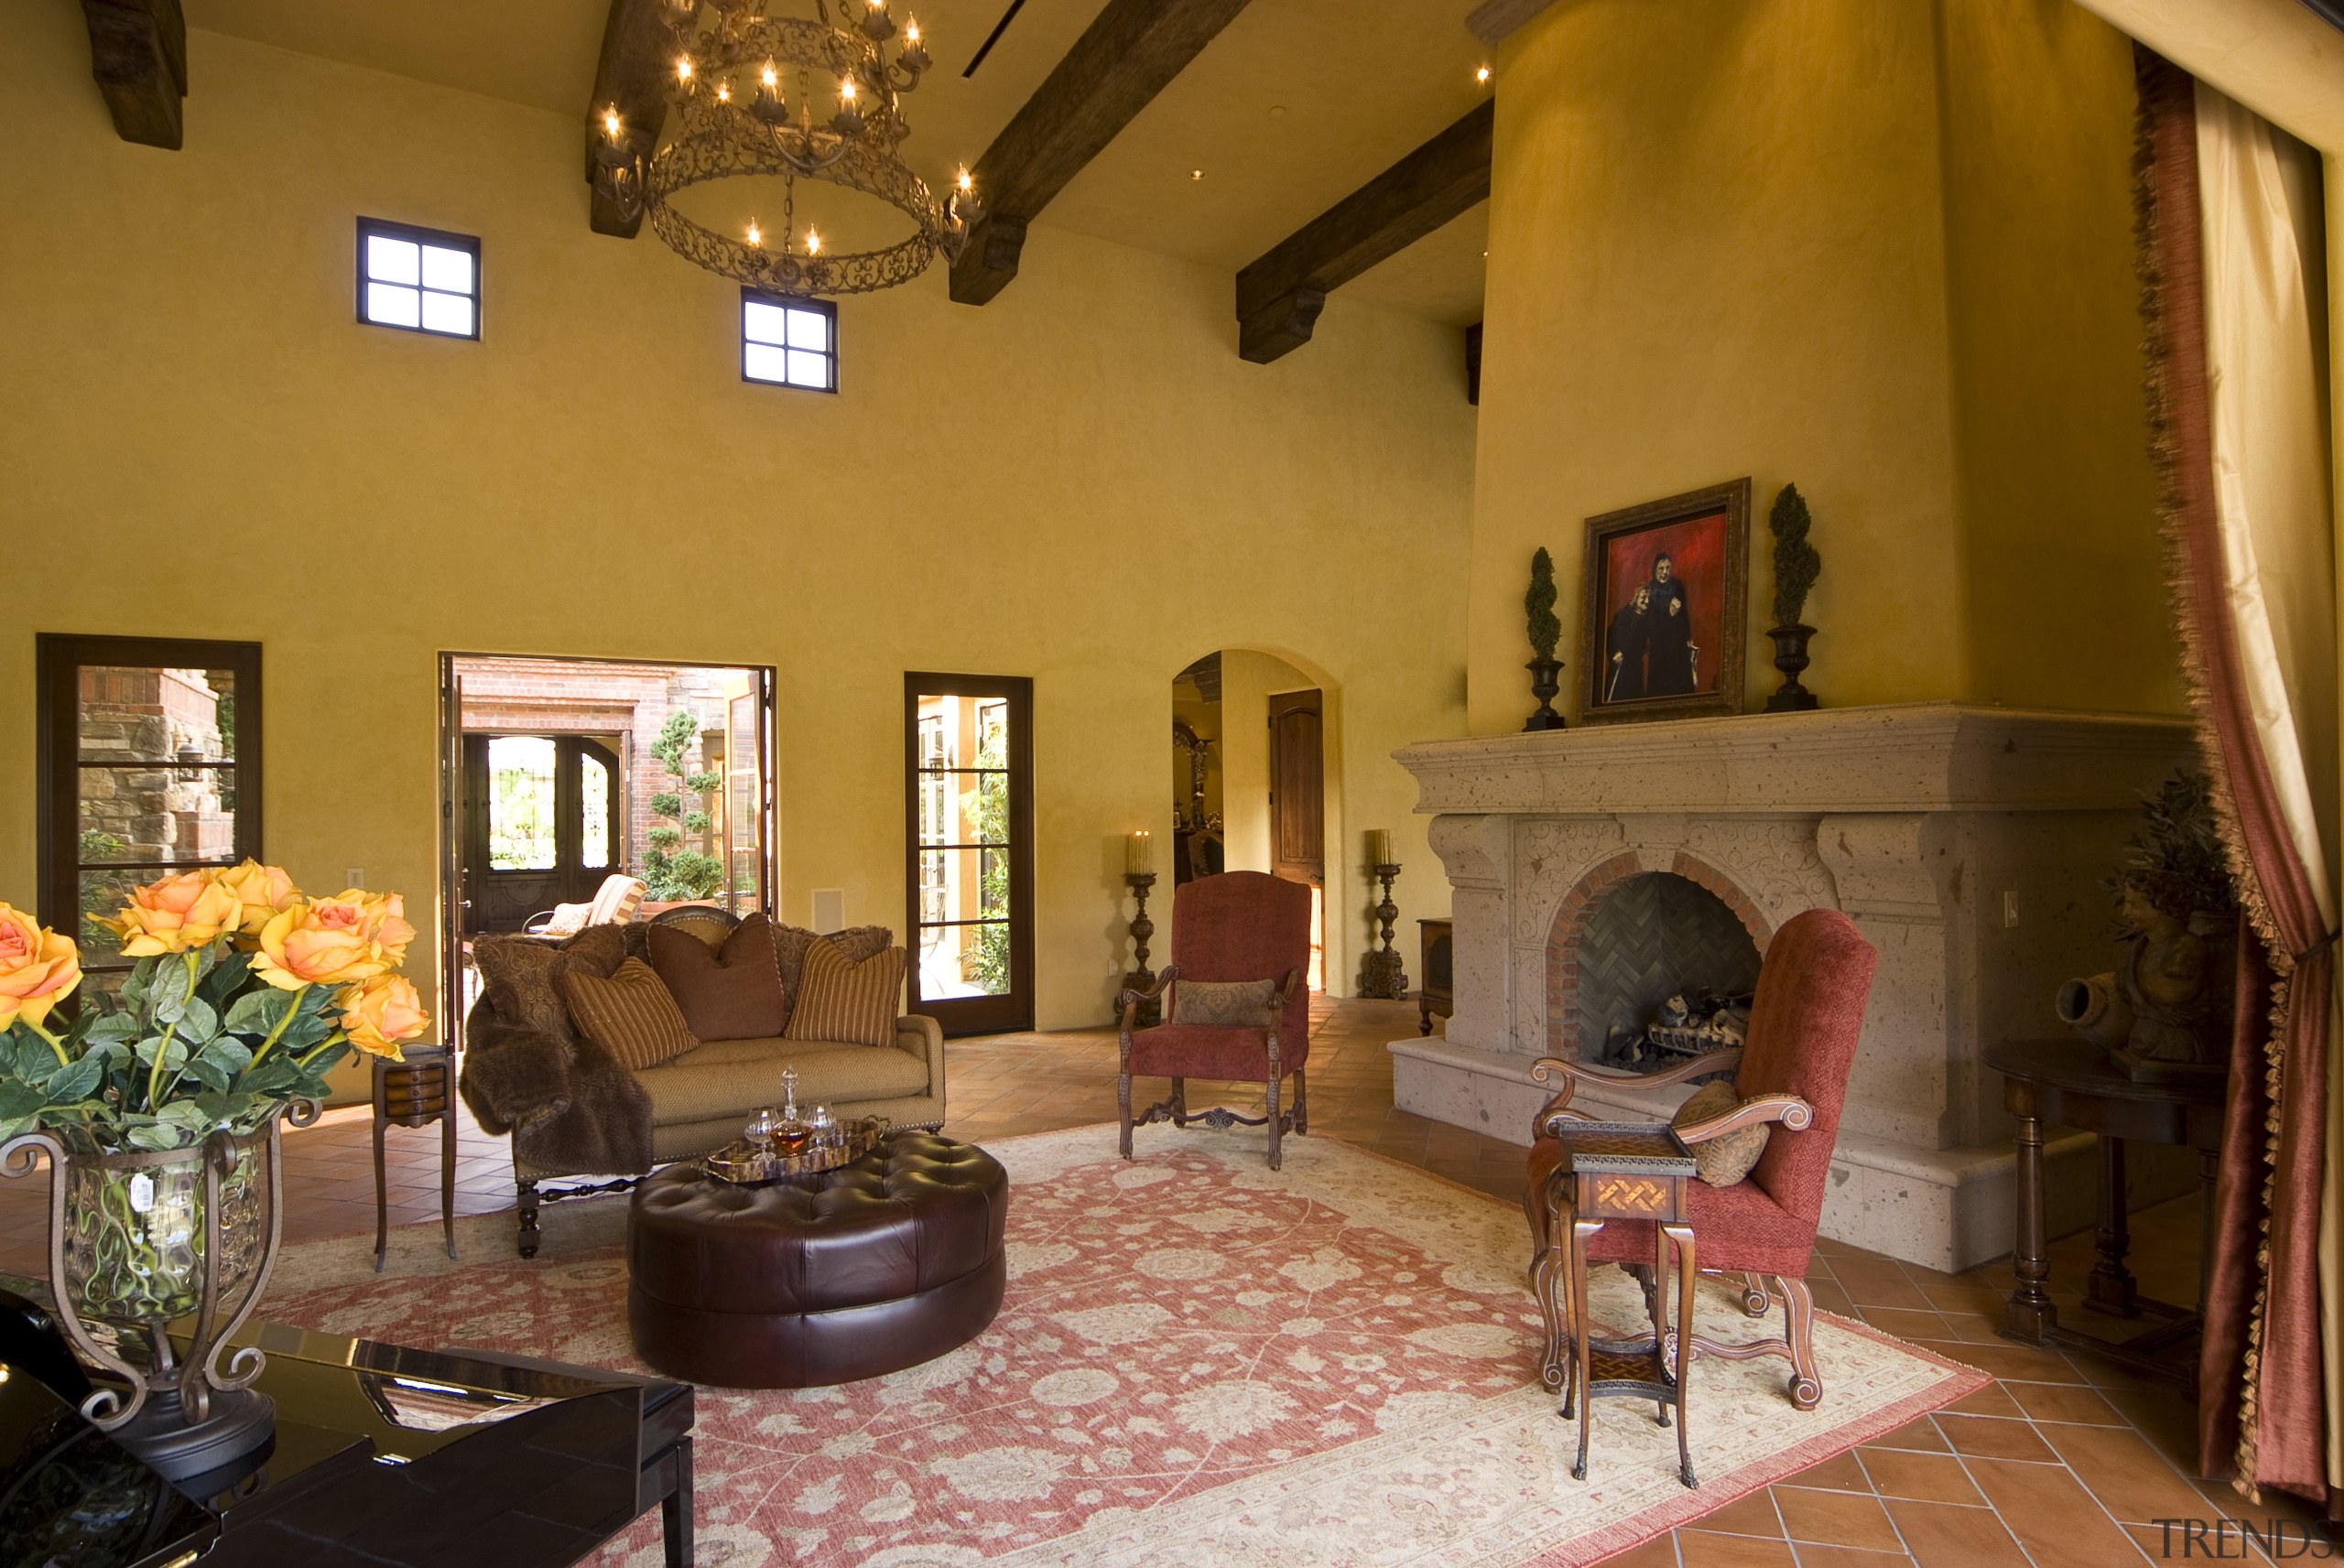 Interior view of the living area which features ceiling, estate, hacienda, home, house, interior design, living room, property, real estate, room, brown, orange